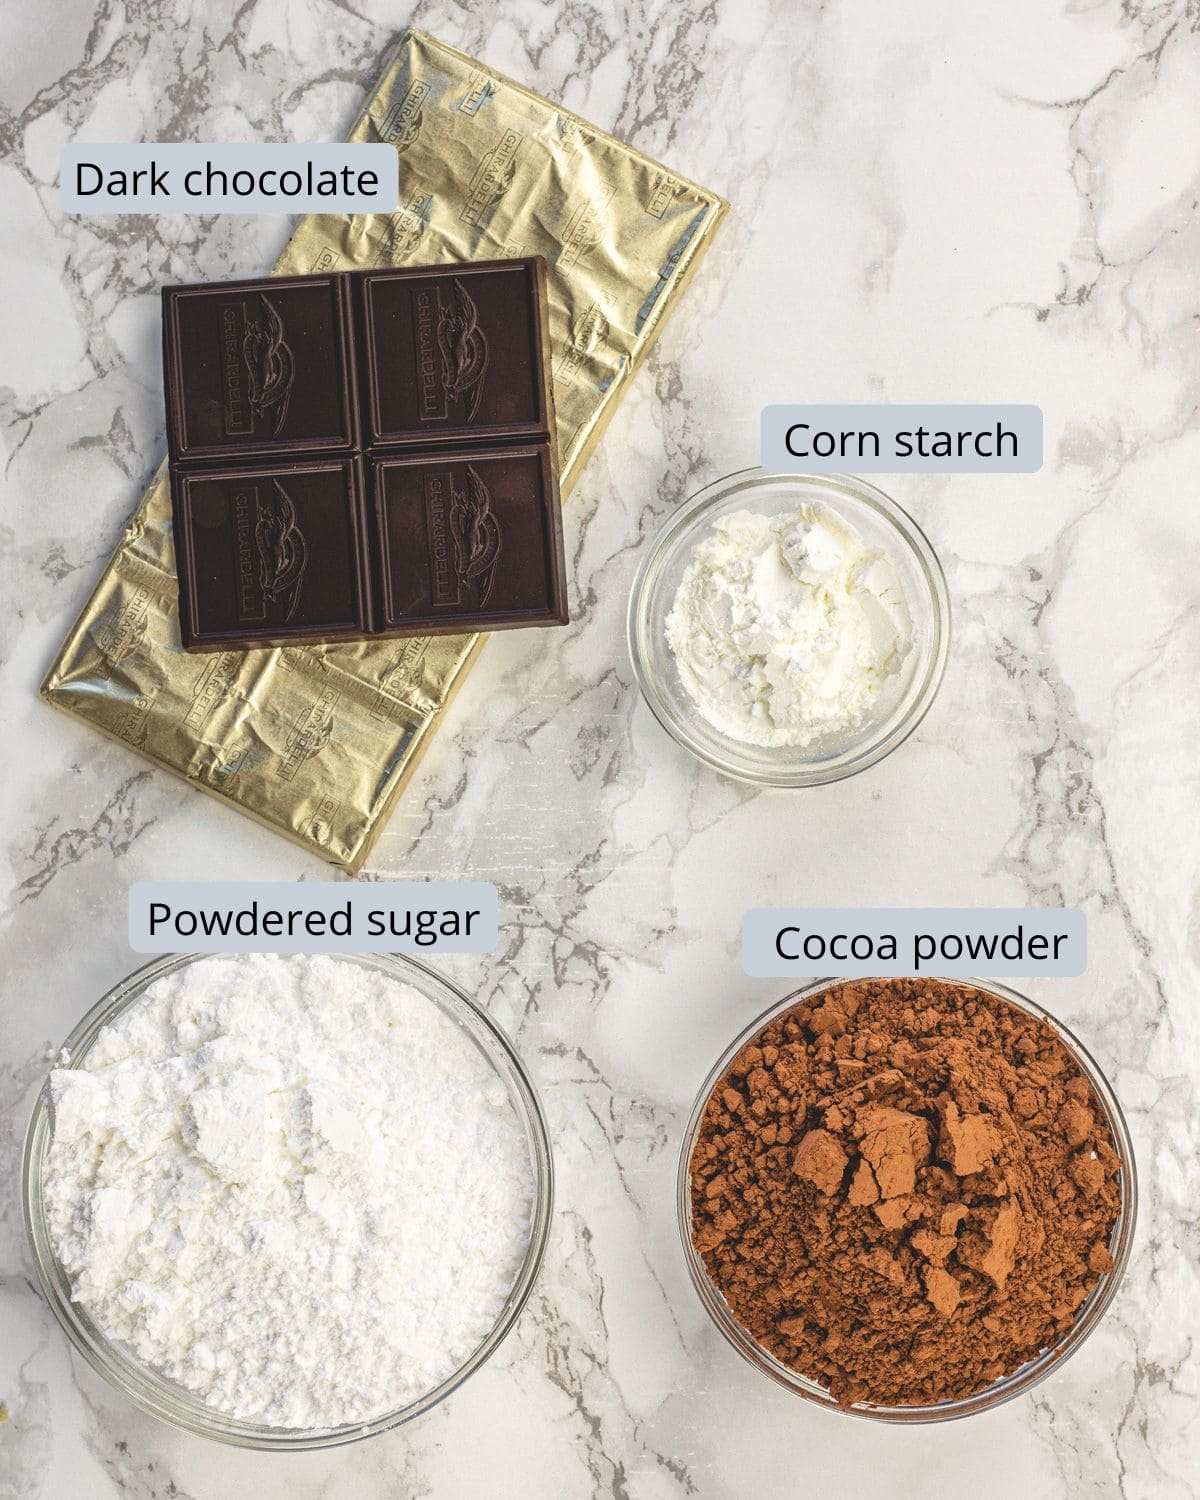 Hot chocolate mix ingredients in bowls with labels.